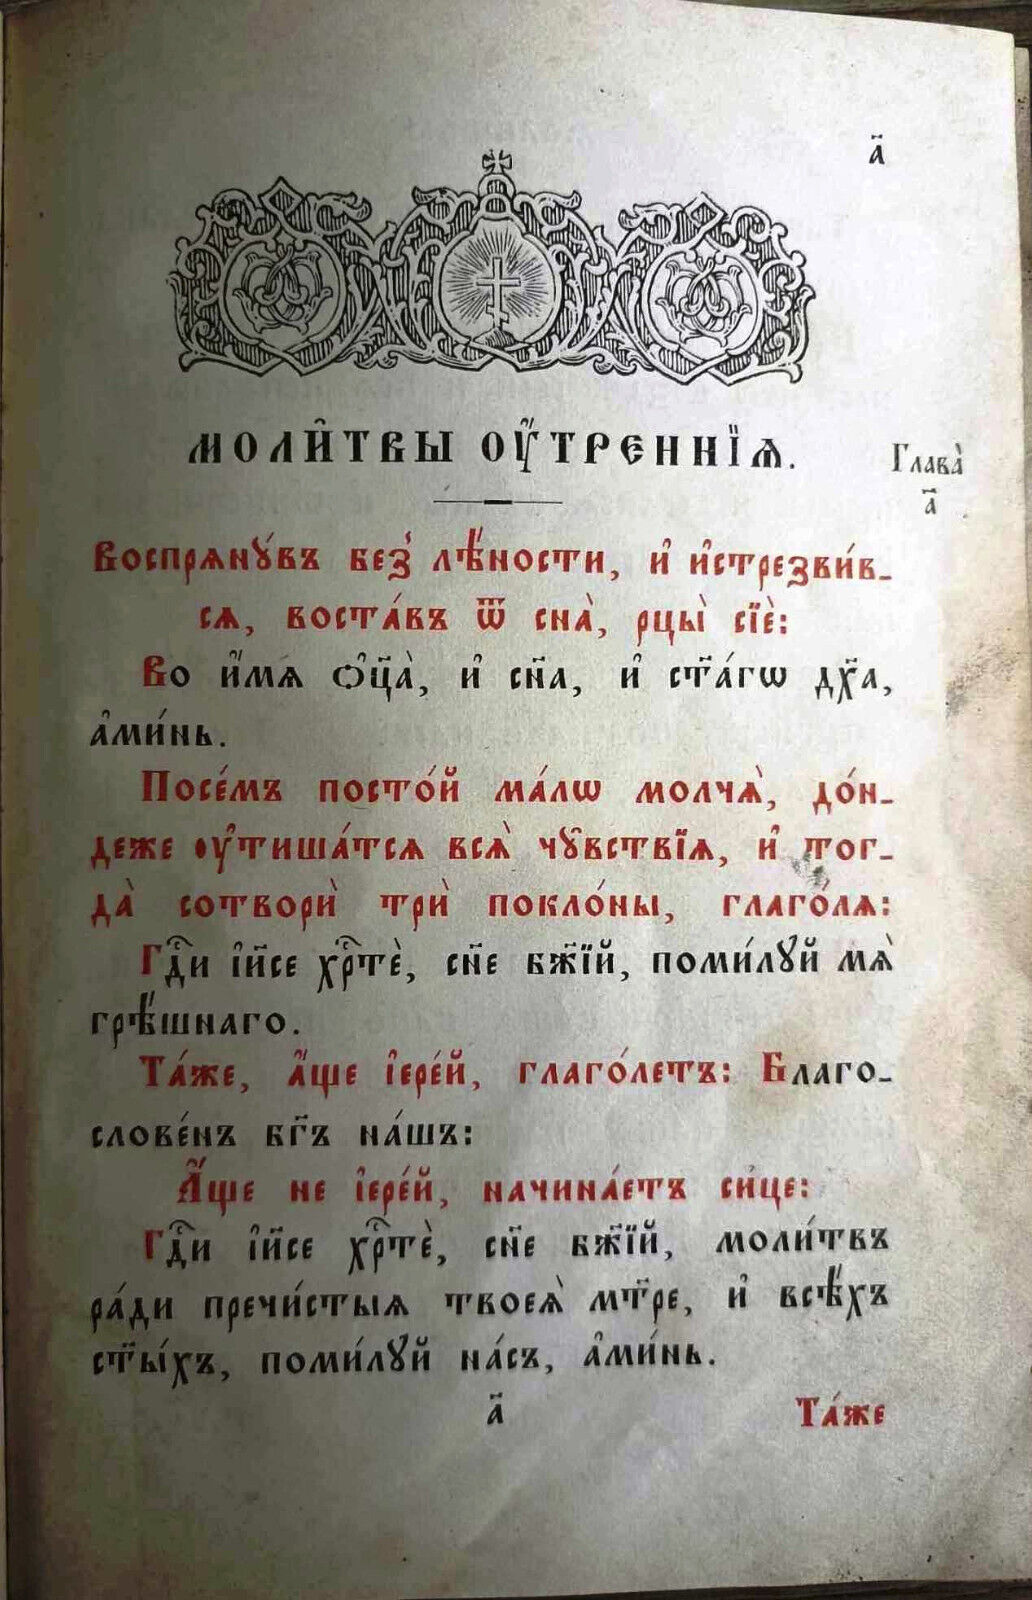 RARE OLD ANTIQUE RUSSIAN CHURCH BOOK, SLAVONIC LANGUAGE - CANON/MOSCOW 1891